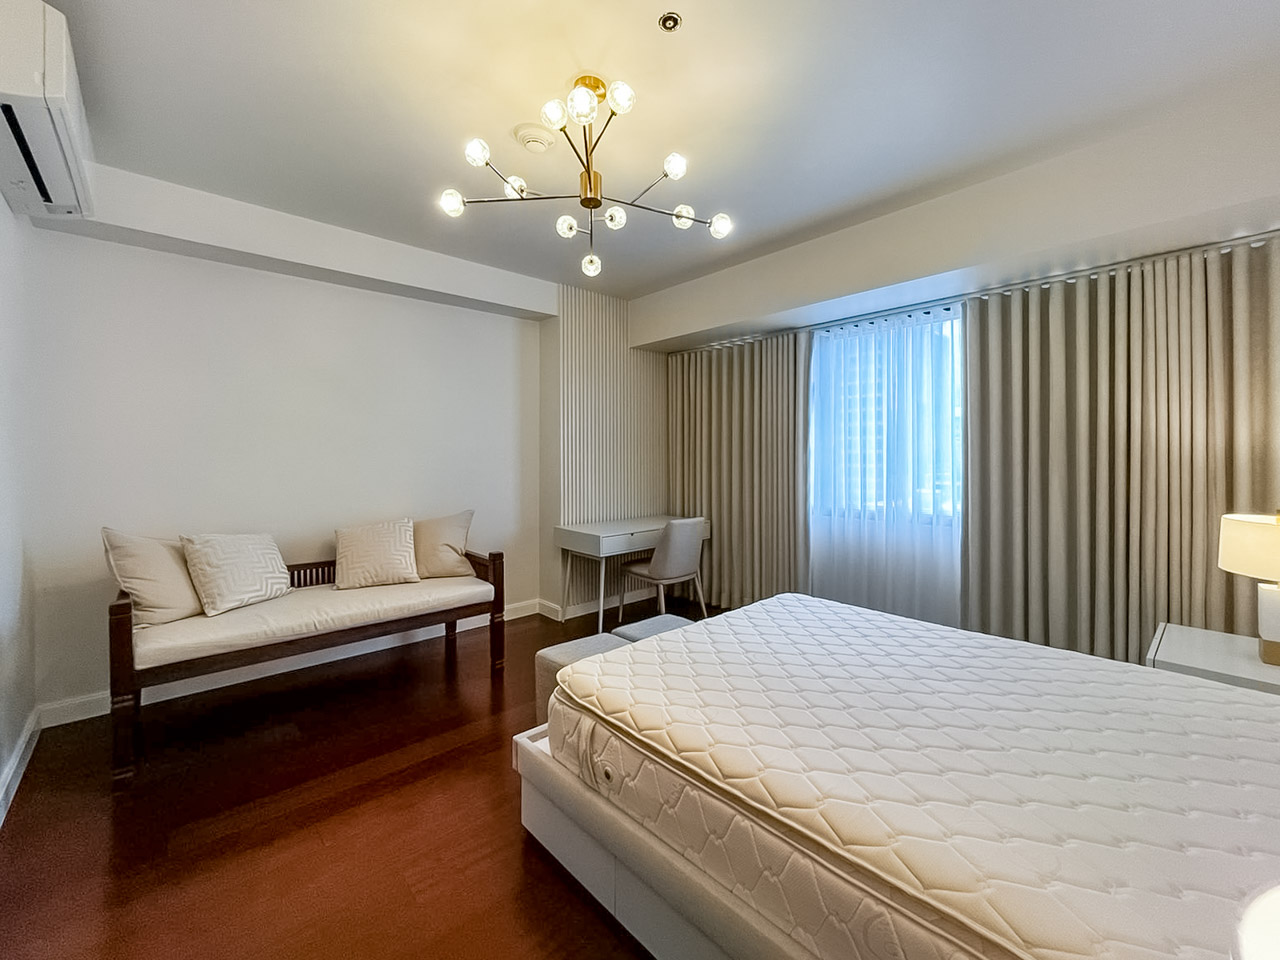 RCALC9 Furnished 2 Bedroom Condo for Rent in Cebu Business Park - 9